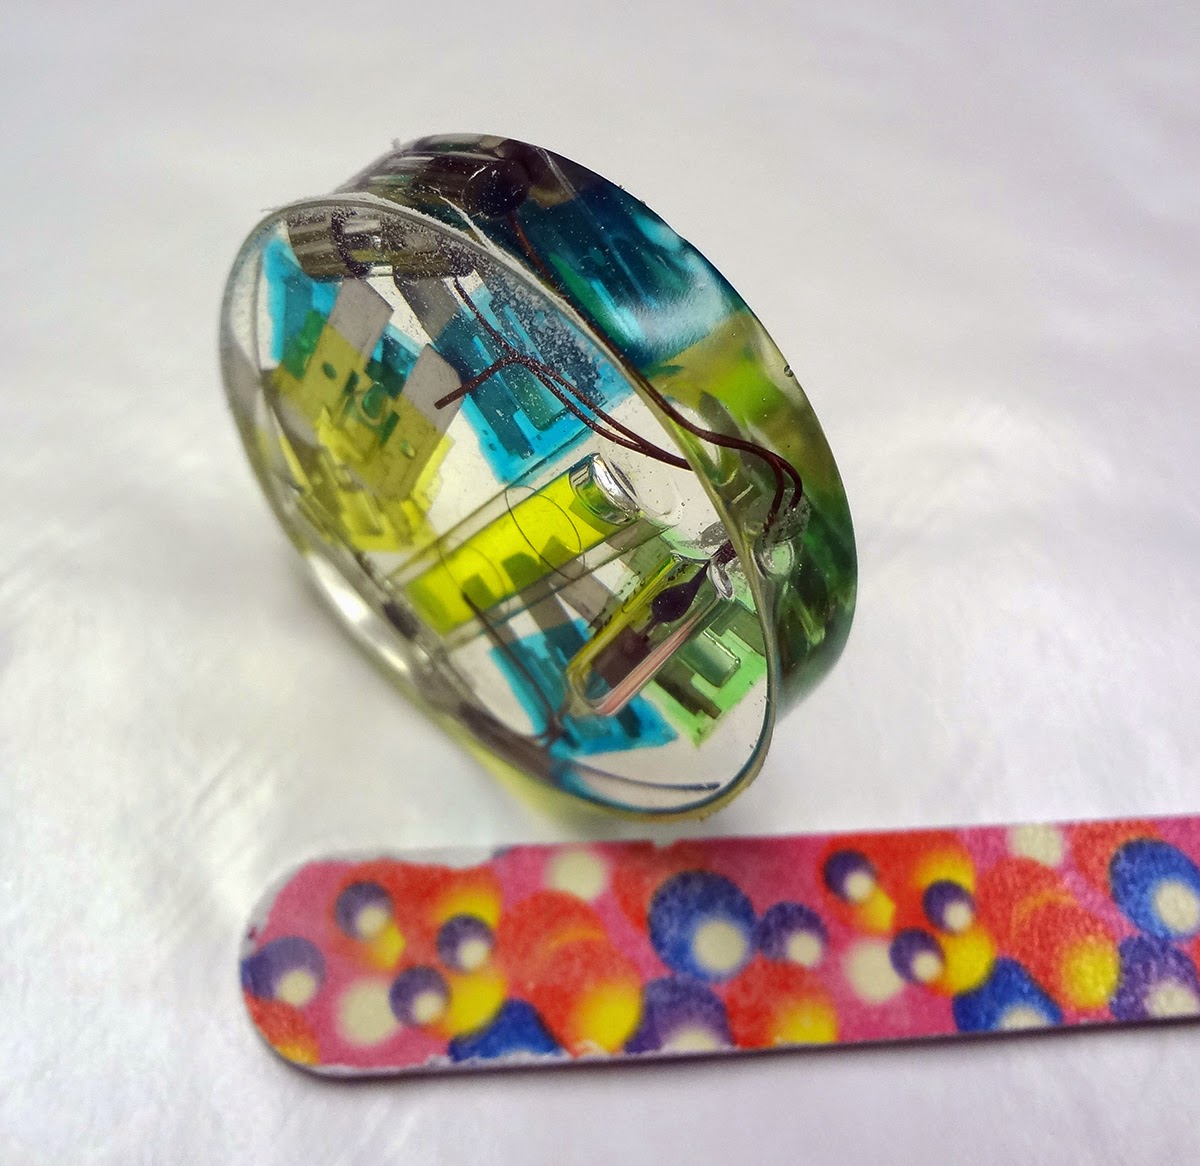 Colored Pencil Paperweight with EasyCast - Resin Crafts Blog